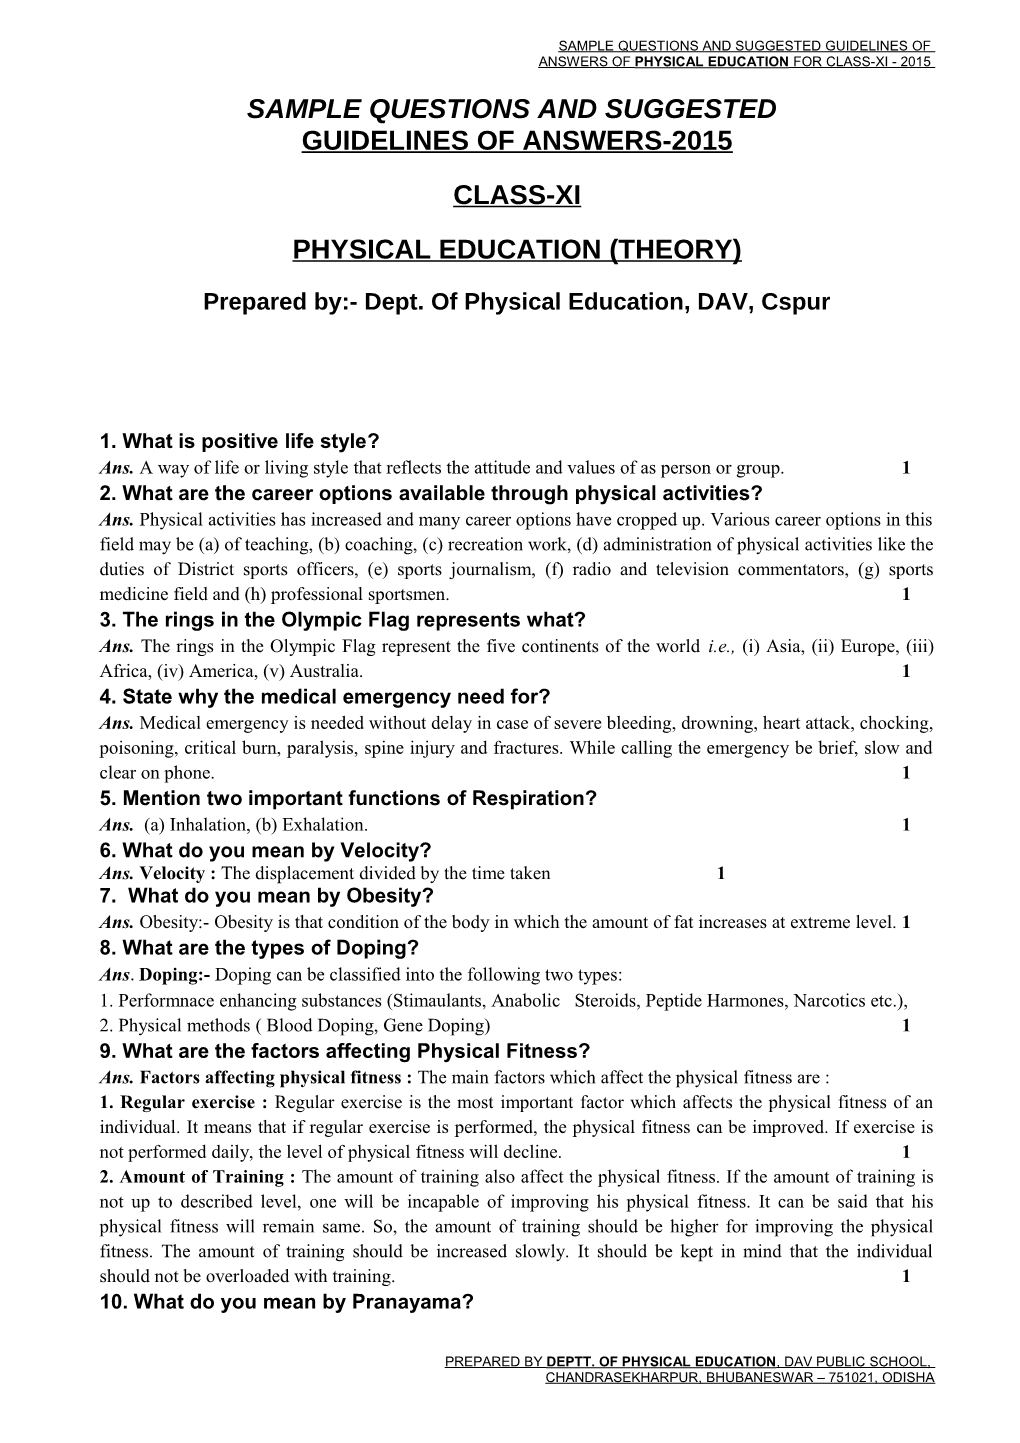 Answers of Physical Education for Class-Xi - 2015